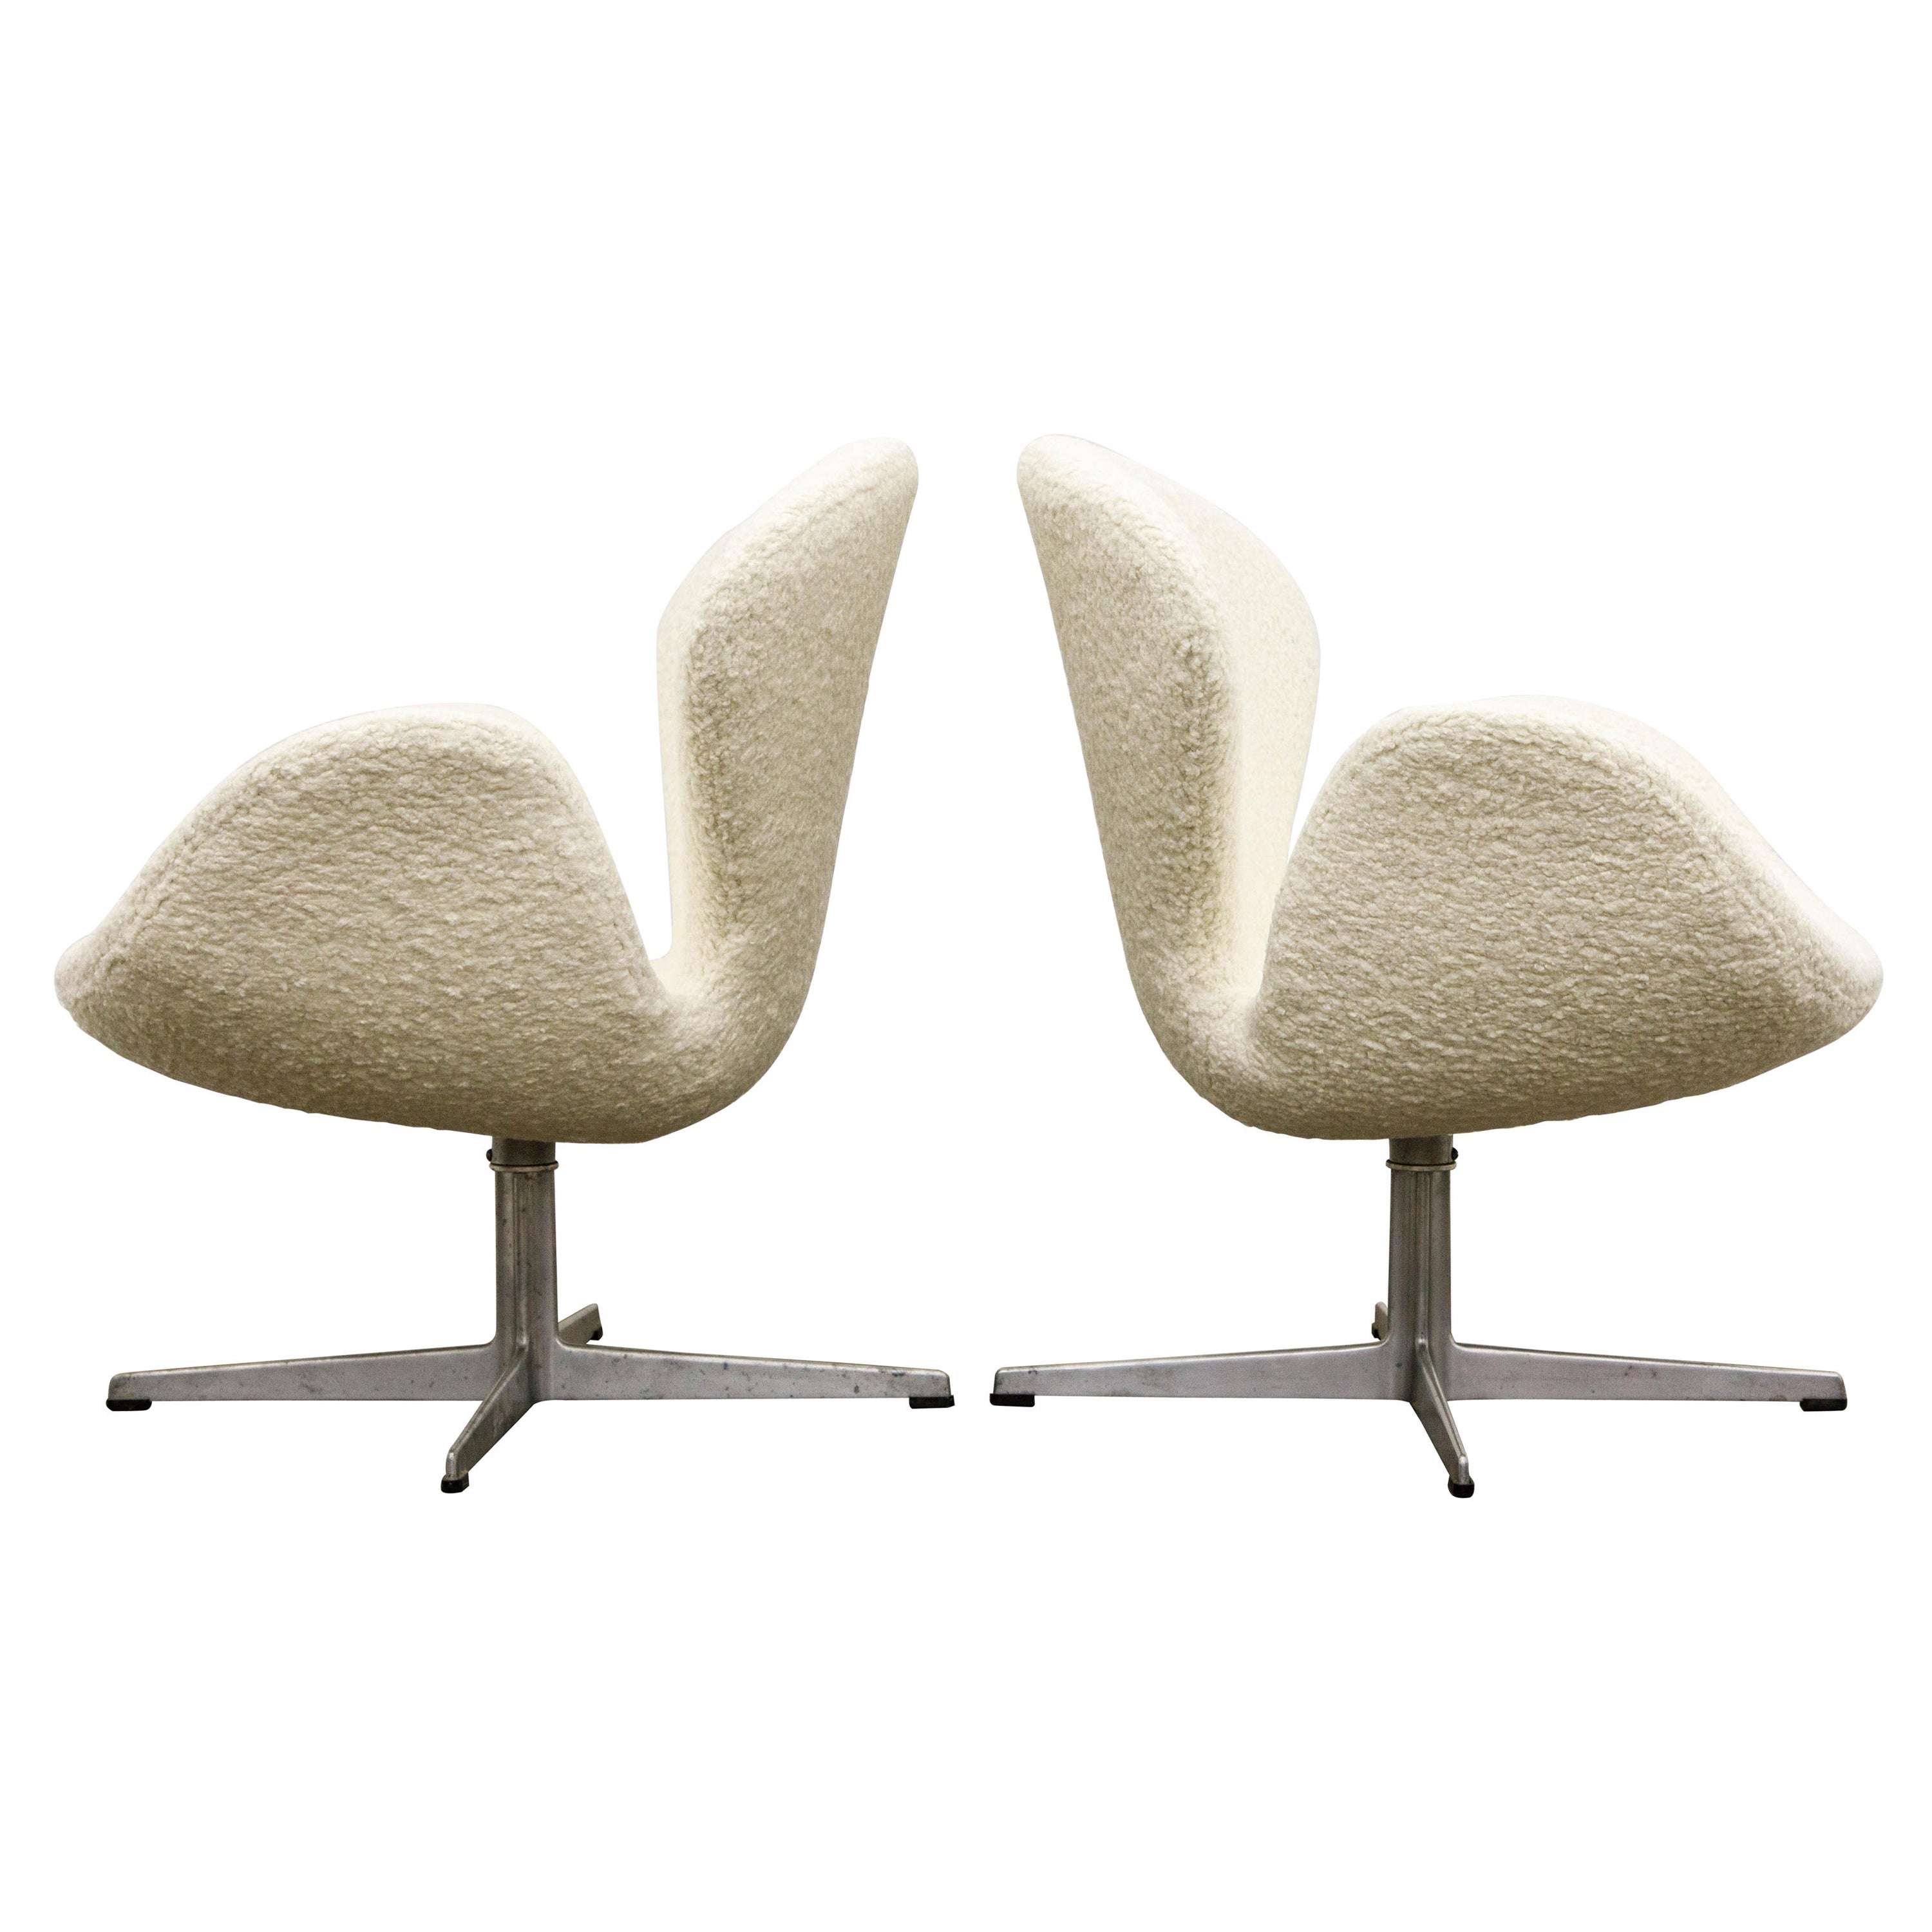 'Swan' Chairs in Bouclé by Arne Jacobsen for Fritz Hansen, Signed and Dated 1969